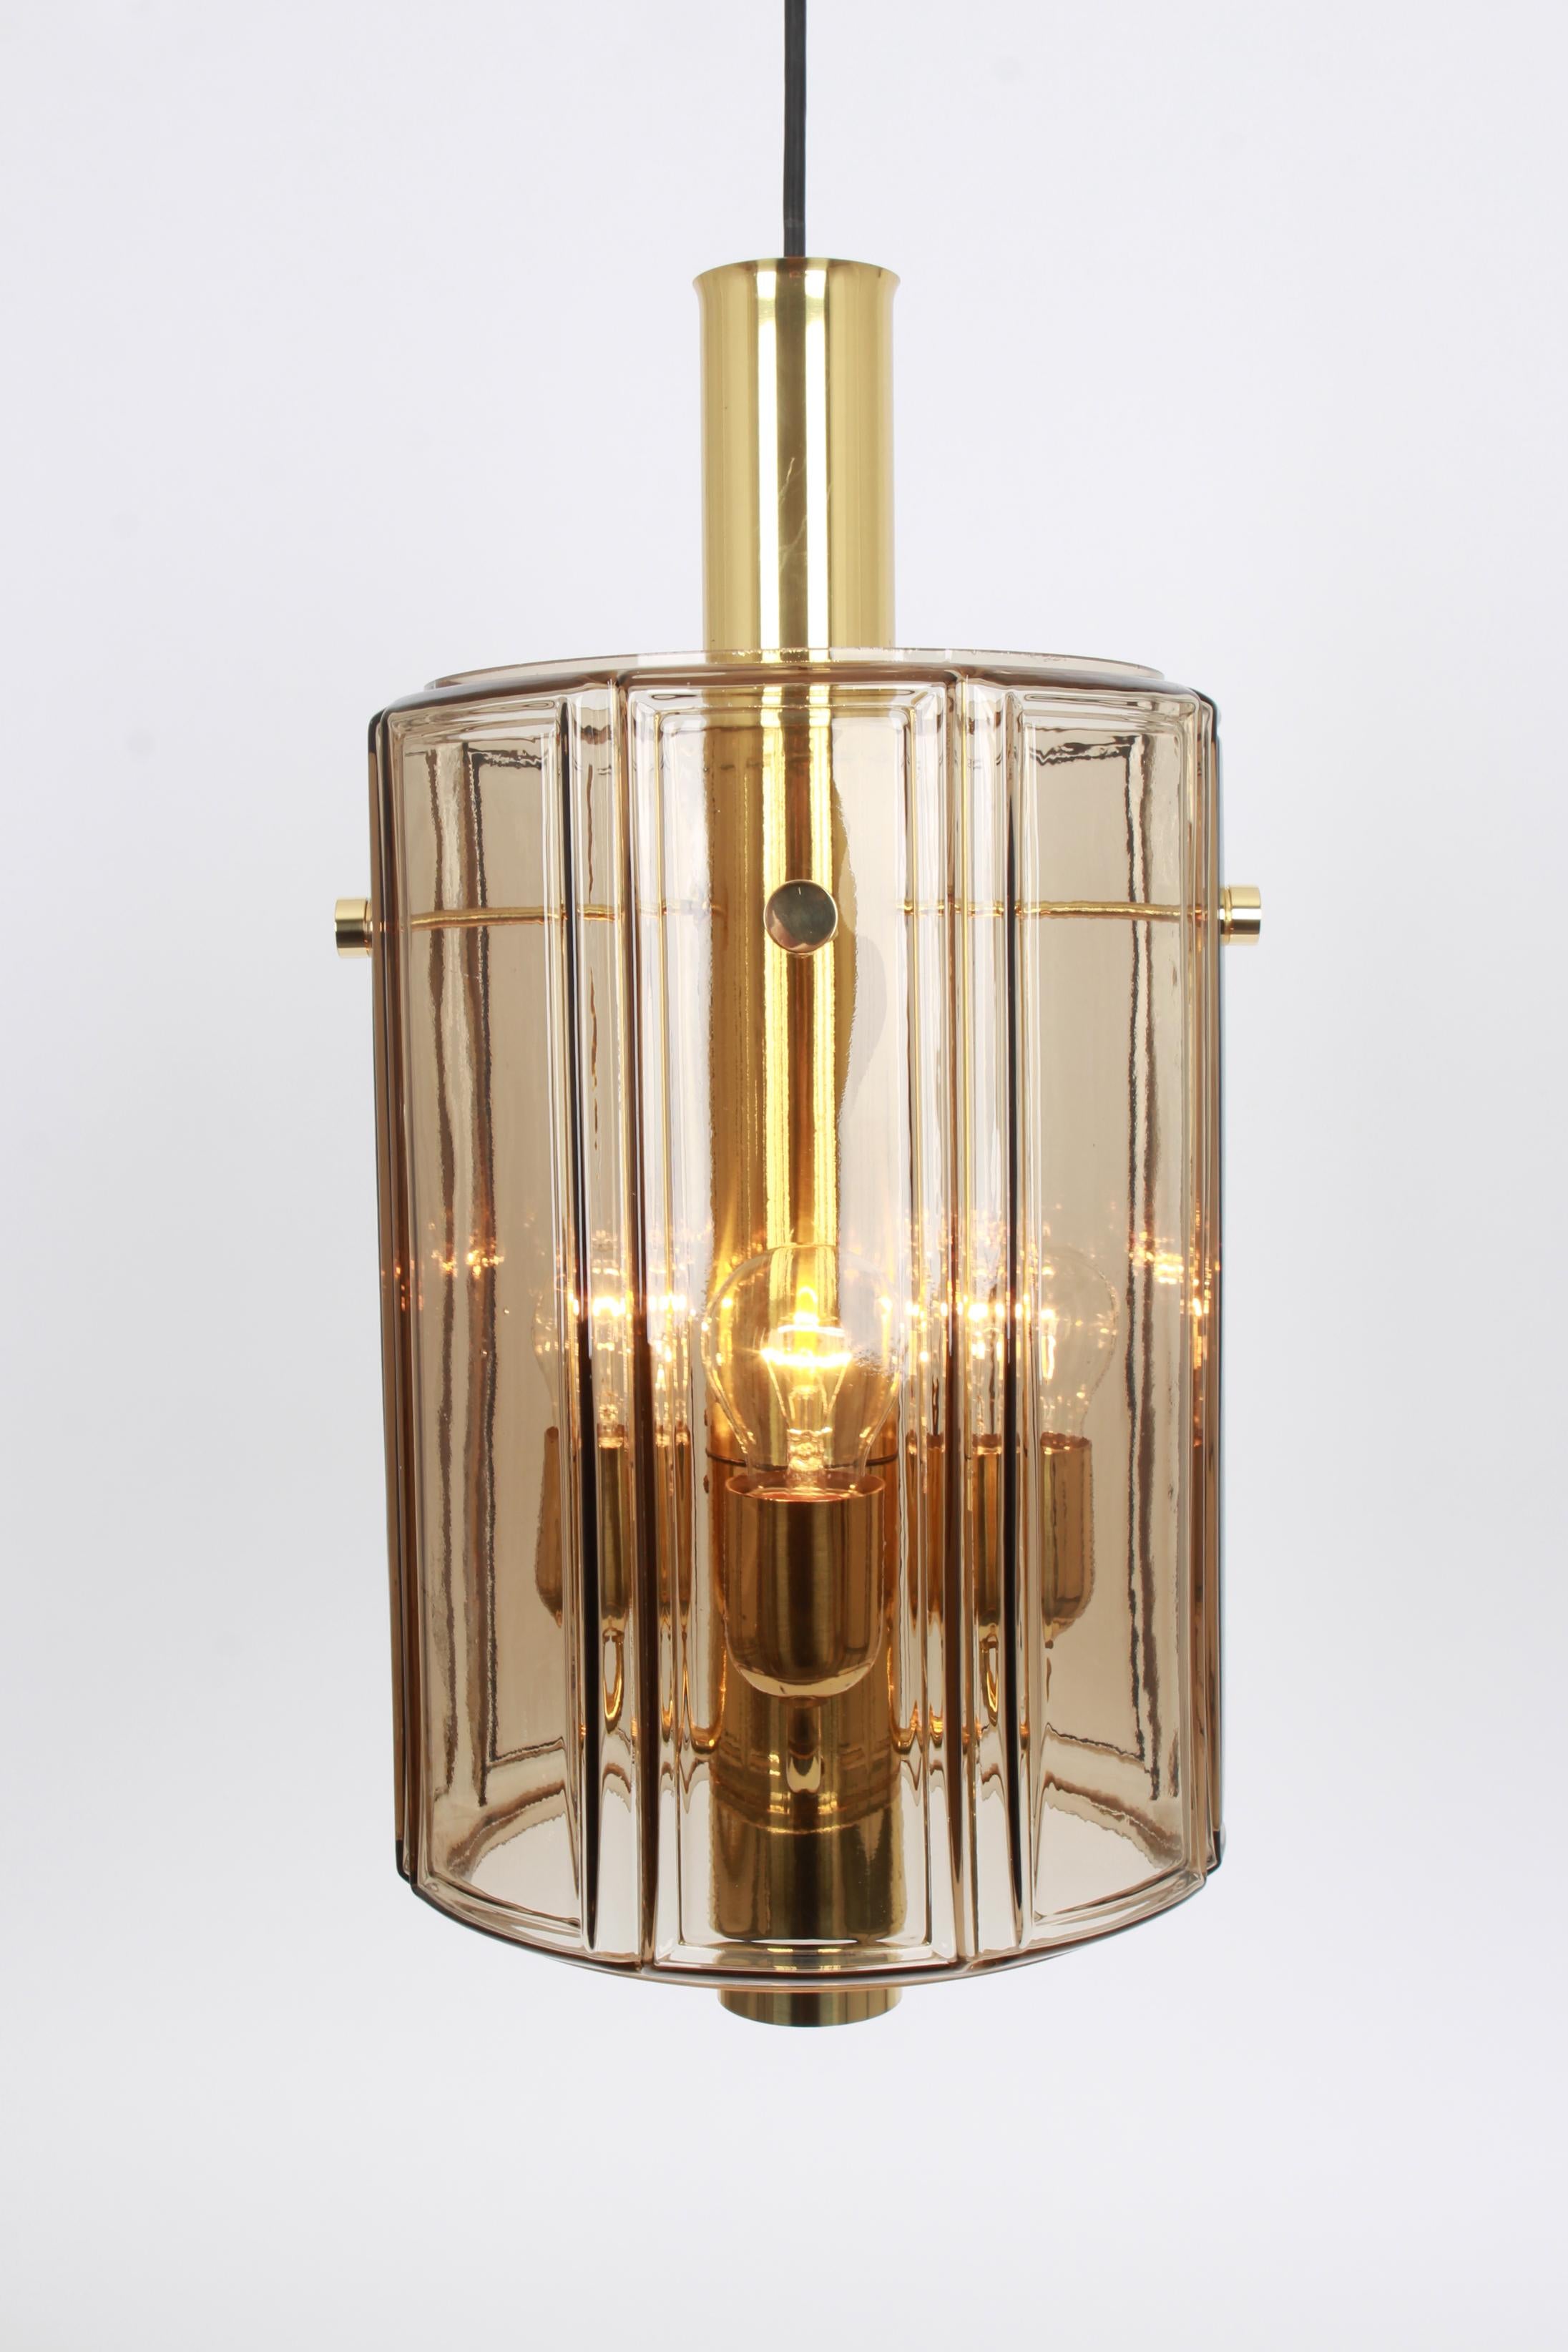 Brass pendant fixture with cylindrical glass shade design by Limburg, Germany, 1960s

Heavy quality and in very good condition. Cleaned, well-wired, and ready to use. The fixture requires 4 x E27 Standard bulbs with 100W max each and function on a